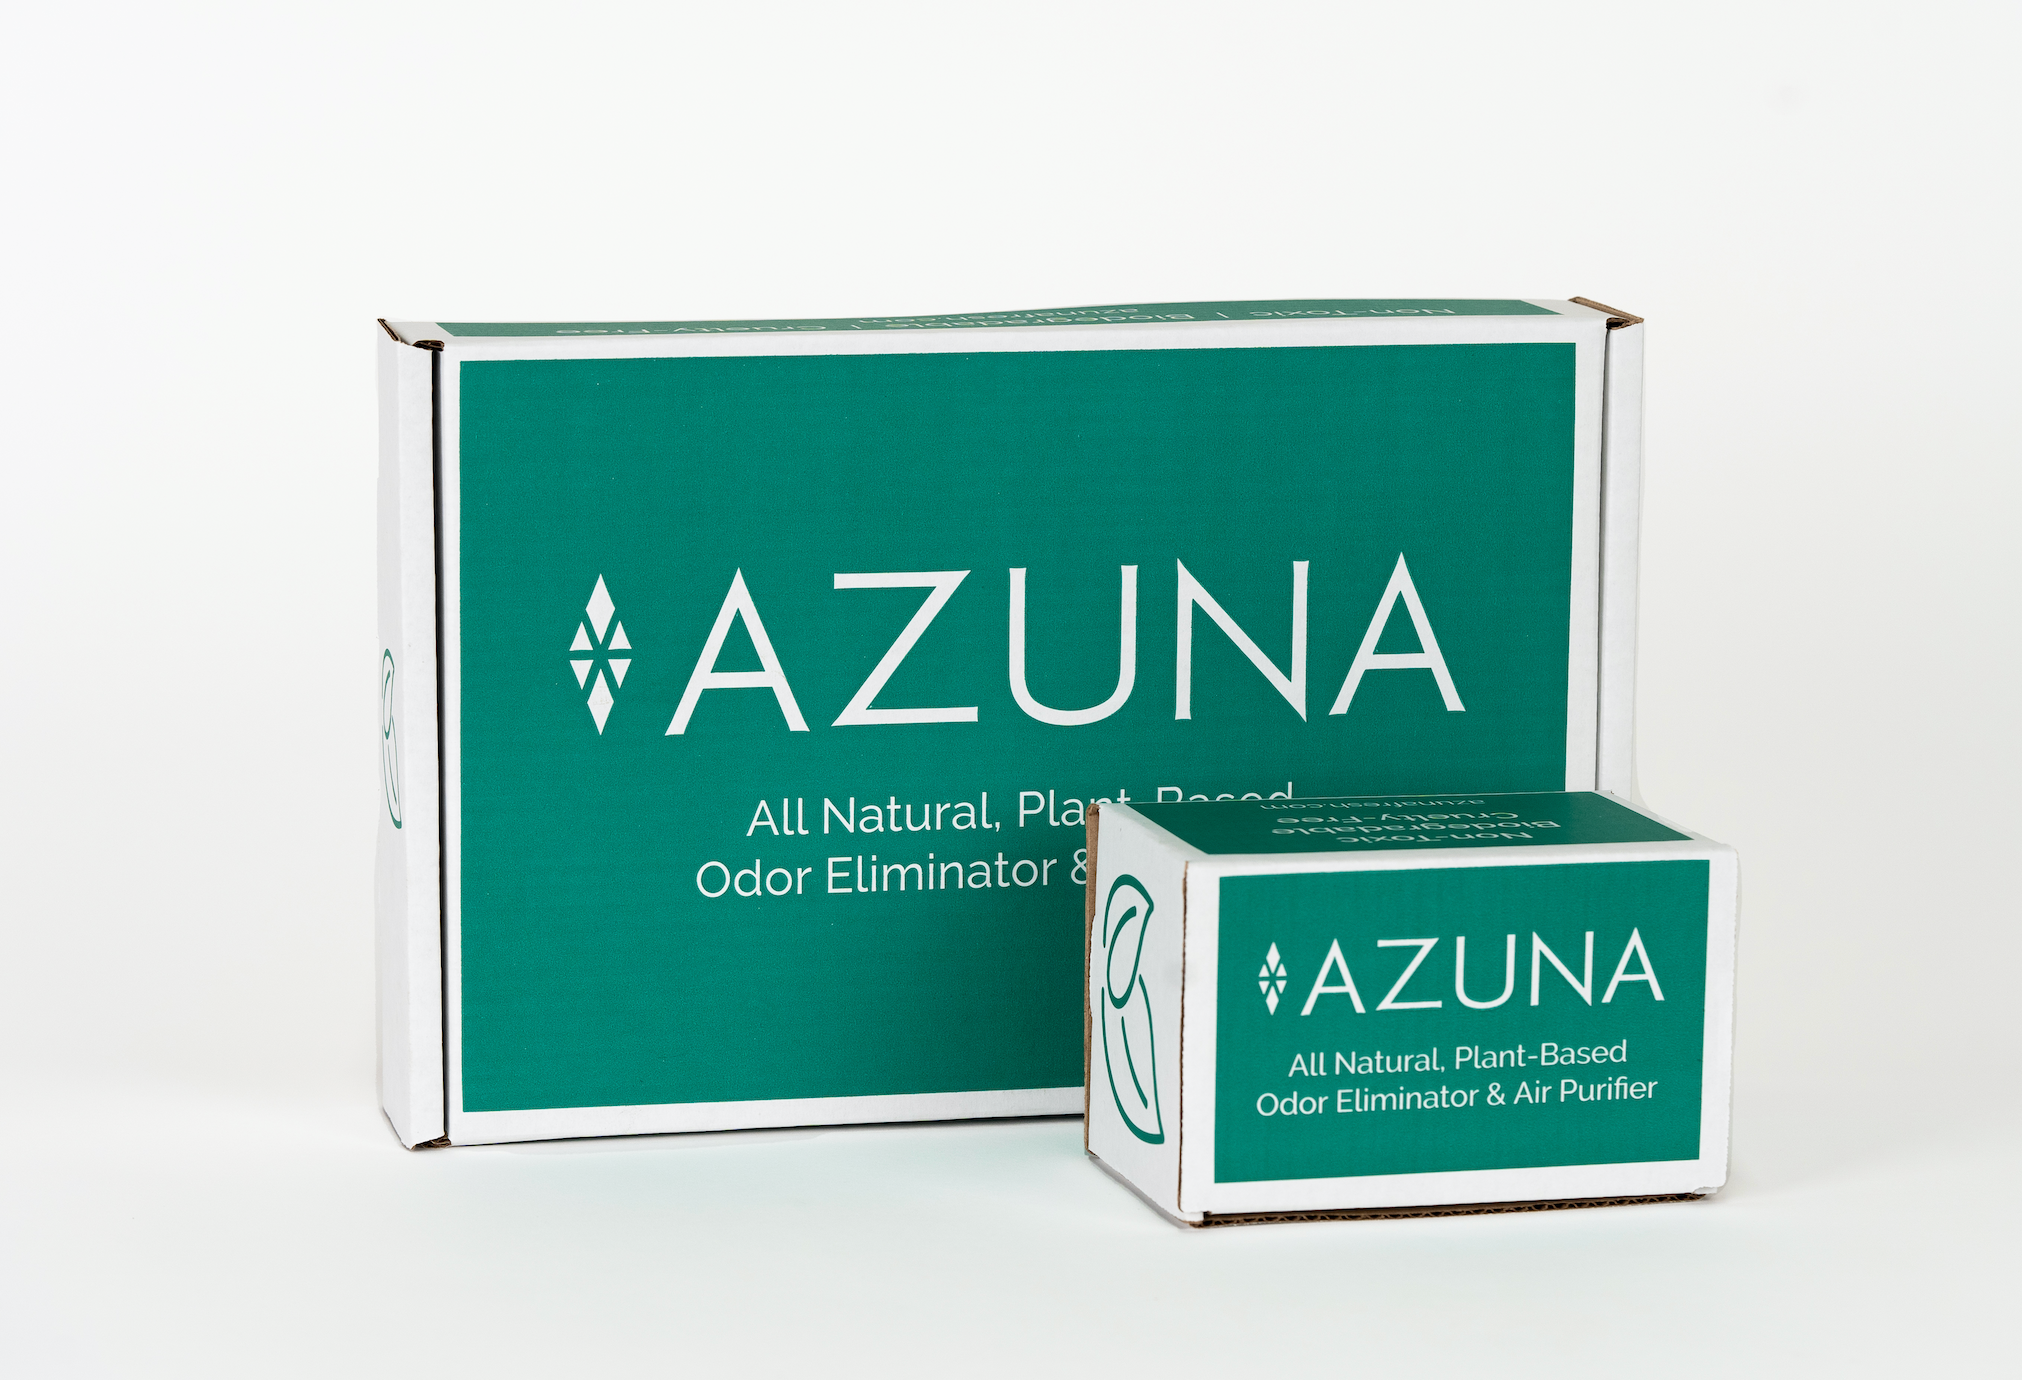 Azuna's all-natural cleaning products attract new investors - BuffaloINNO